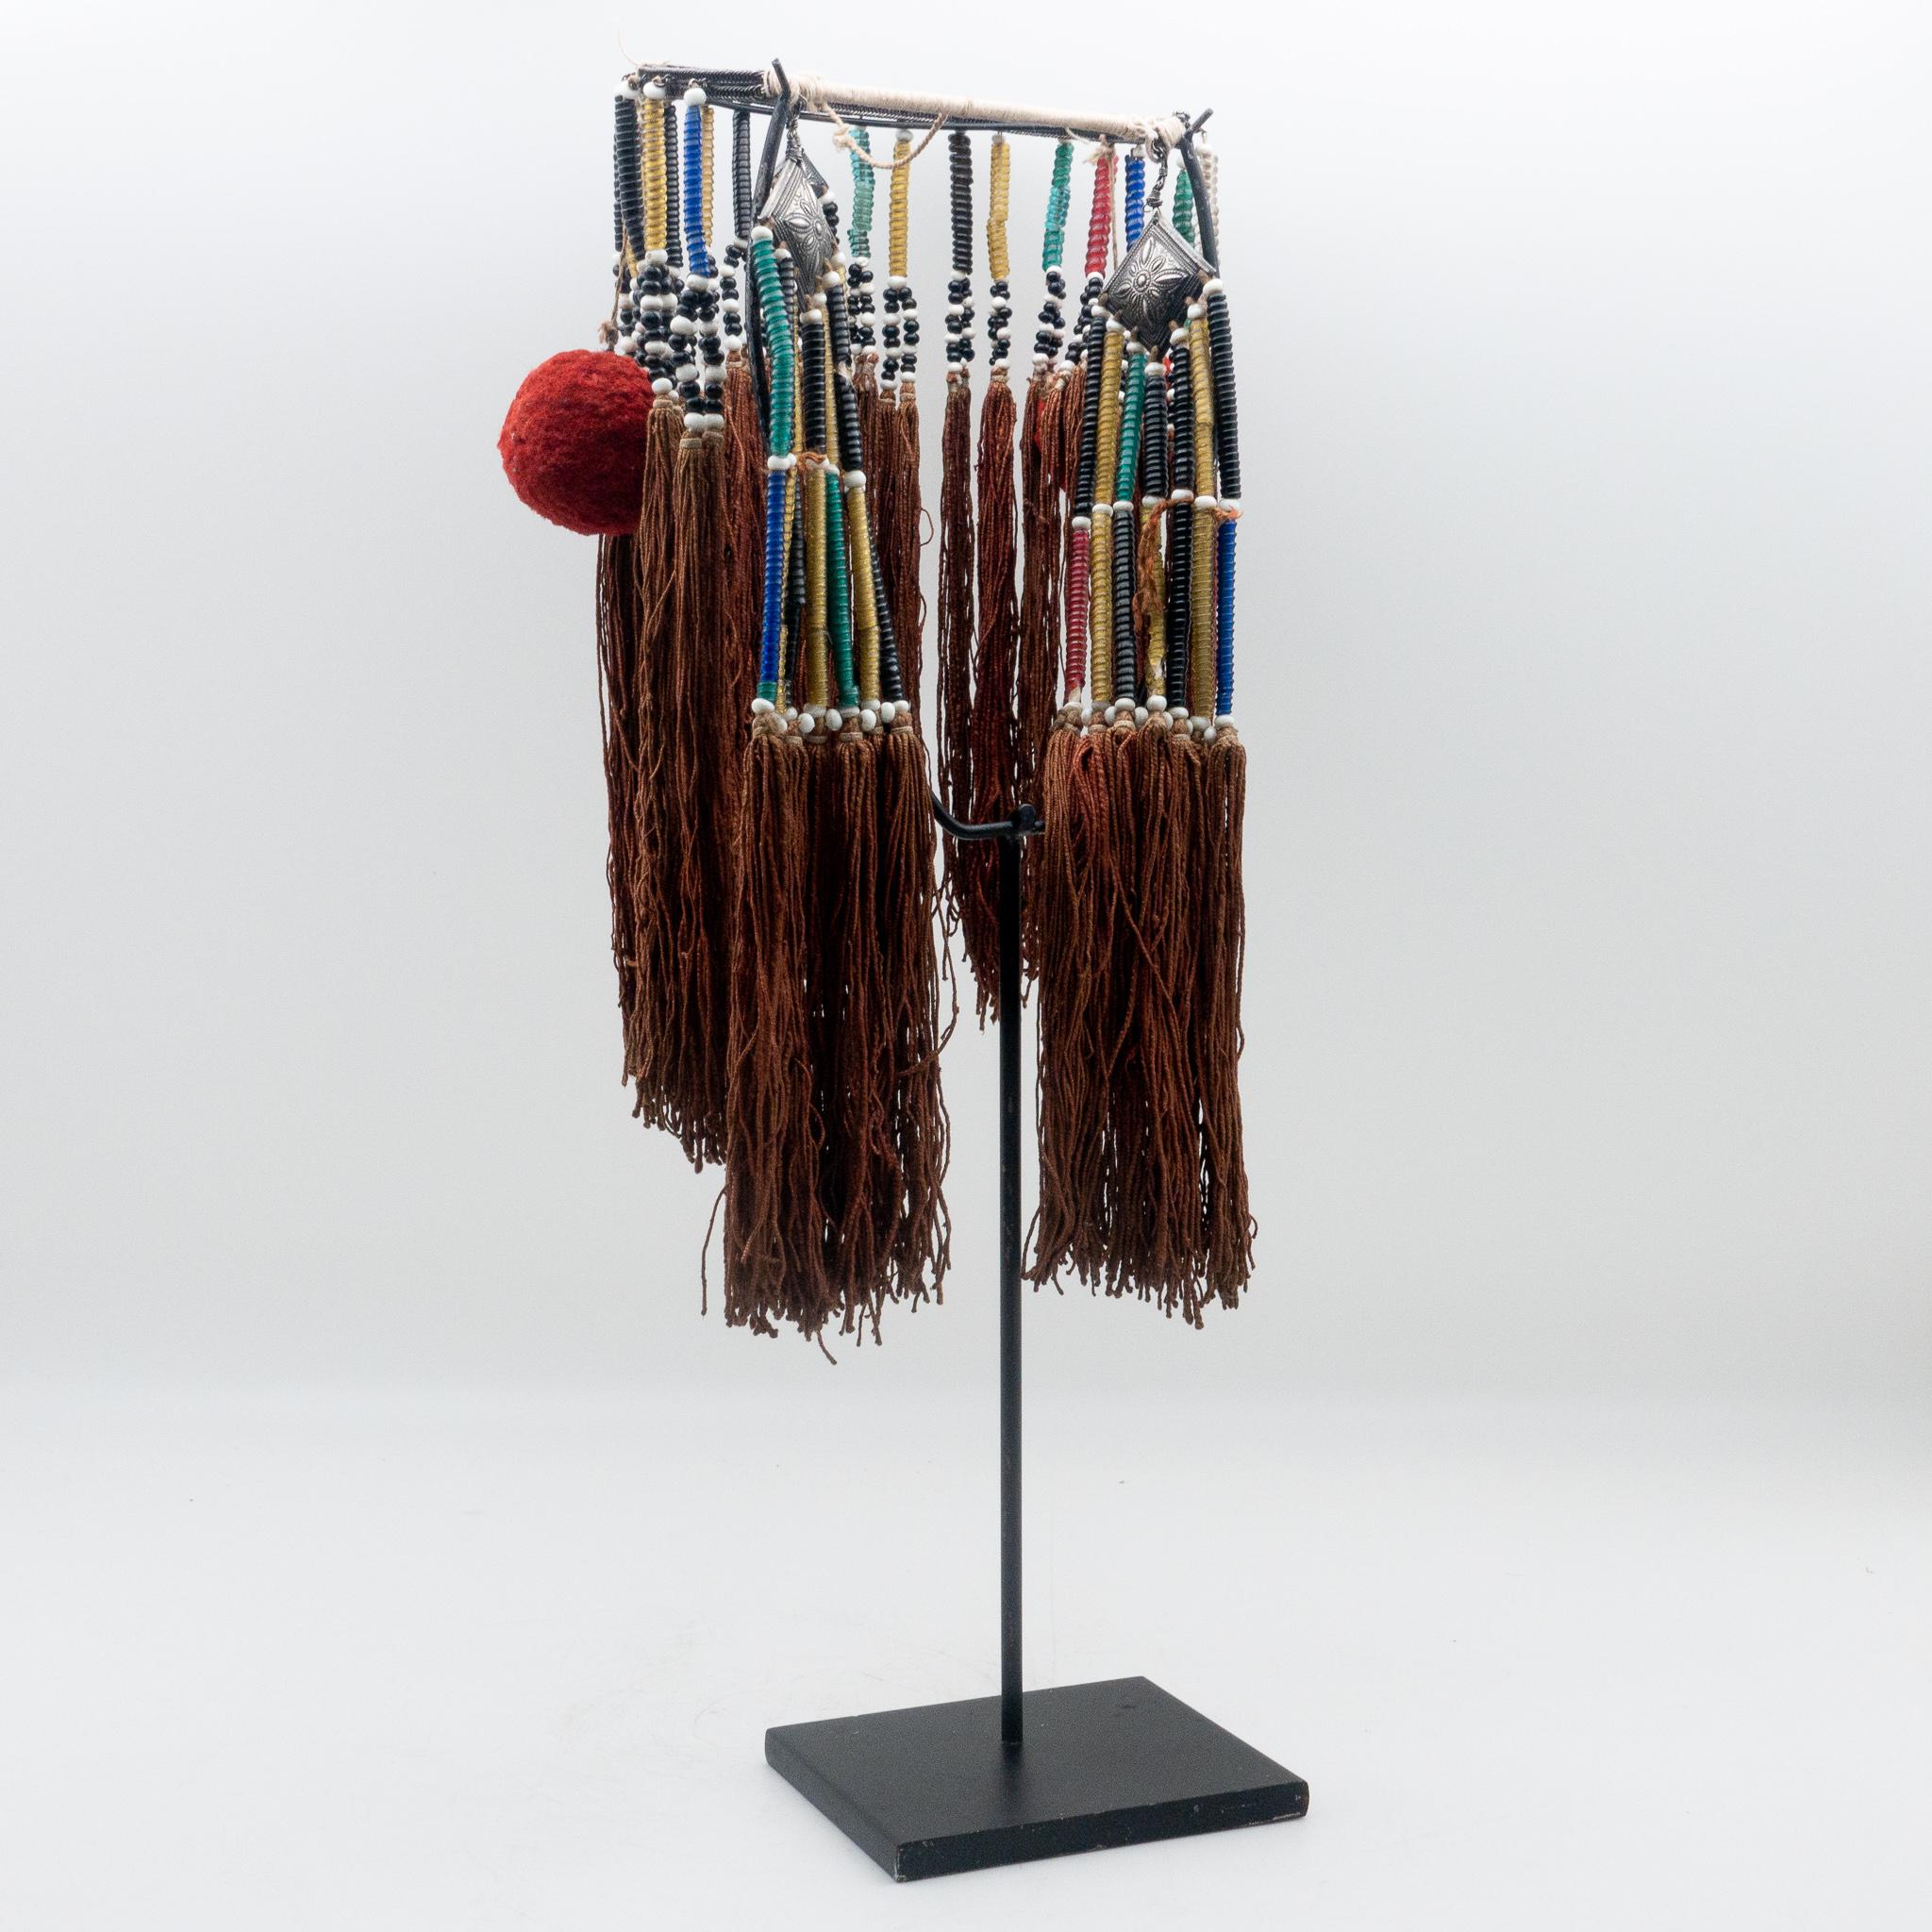 Miao Minority tribe headdress with beads, silver pendants, pom-poms, and tassels from the mid 20th century on a custom black painted metal mount.

  